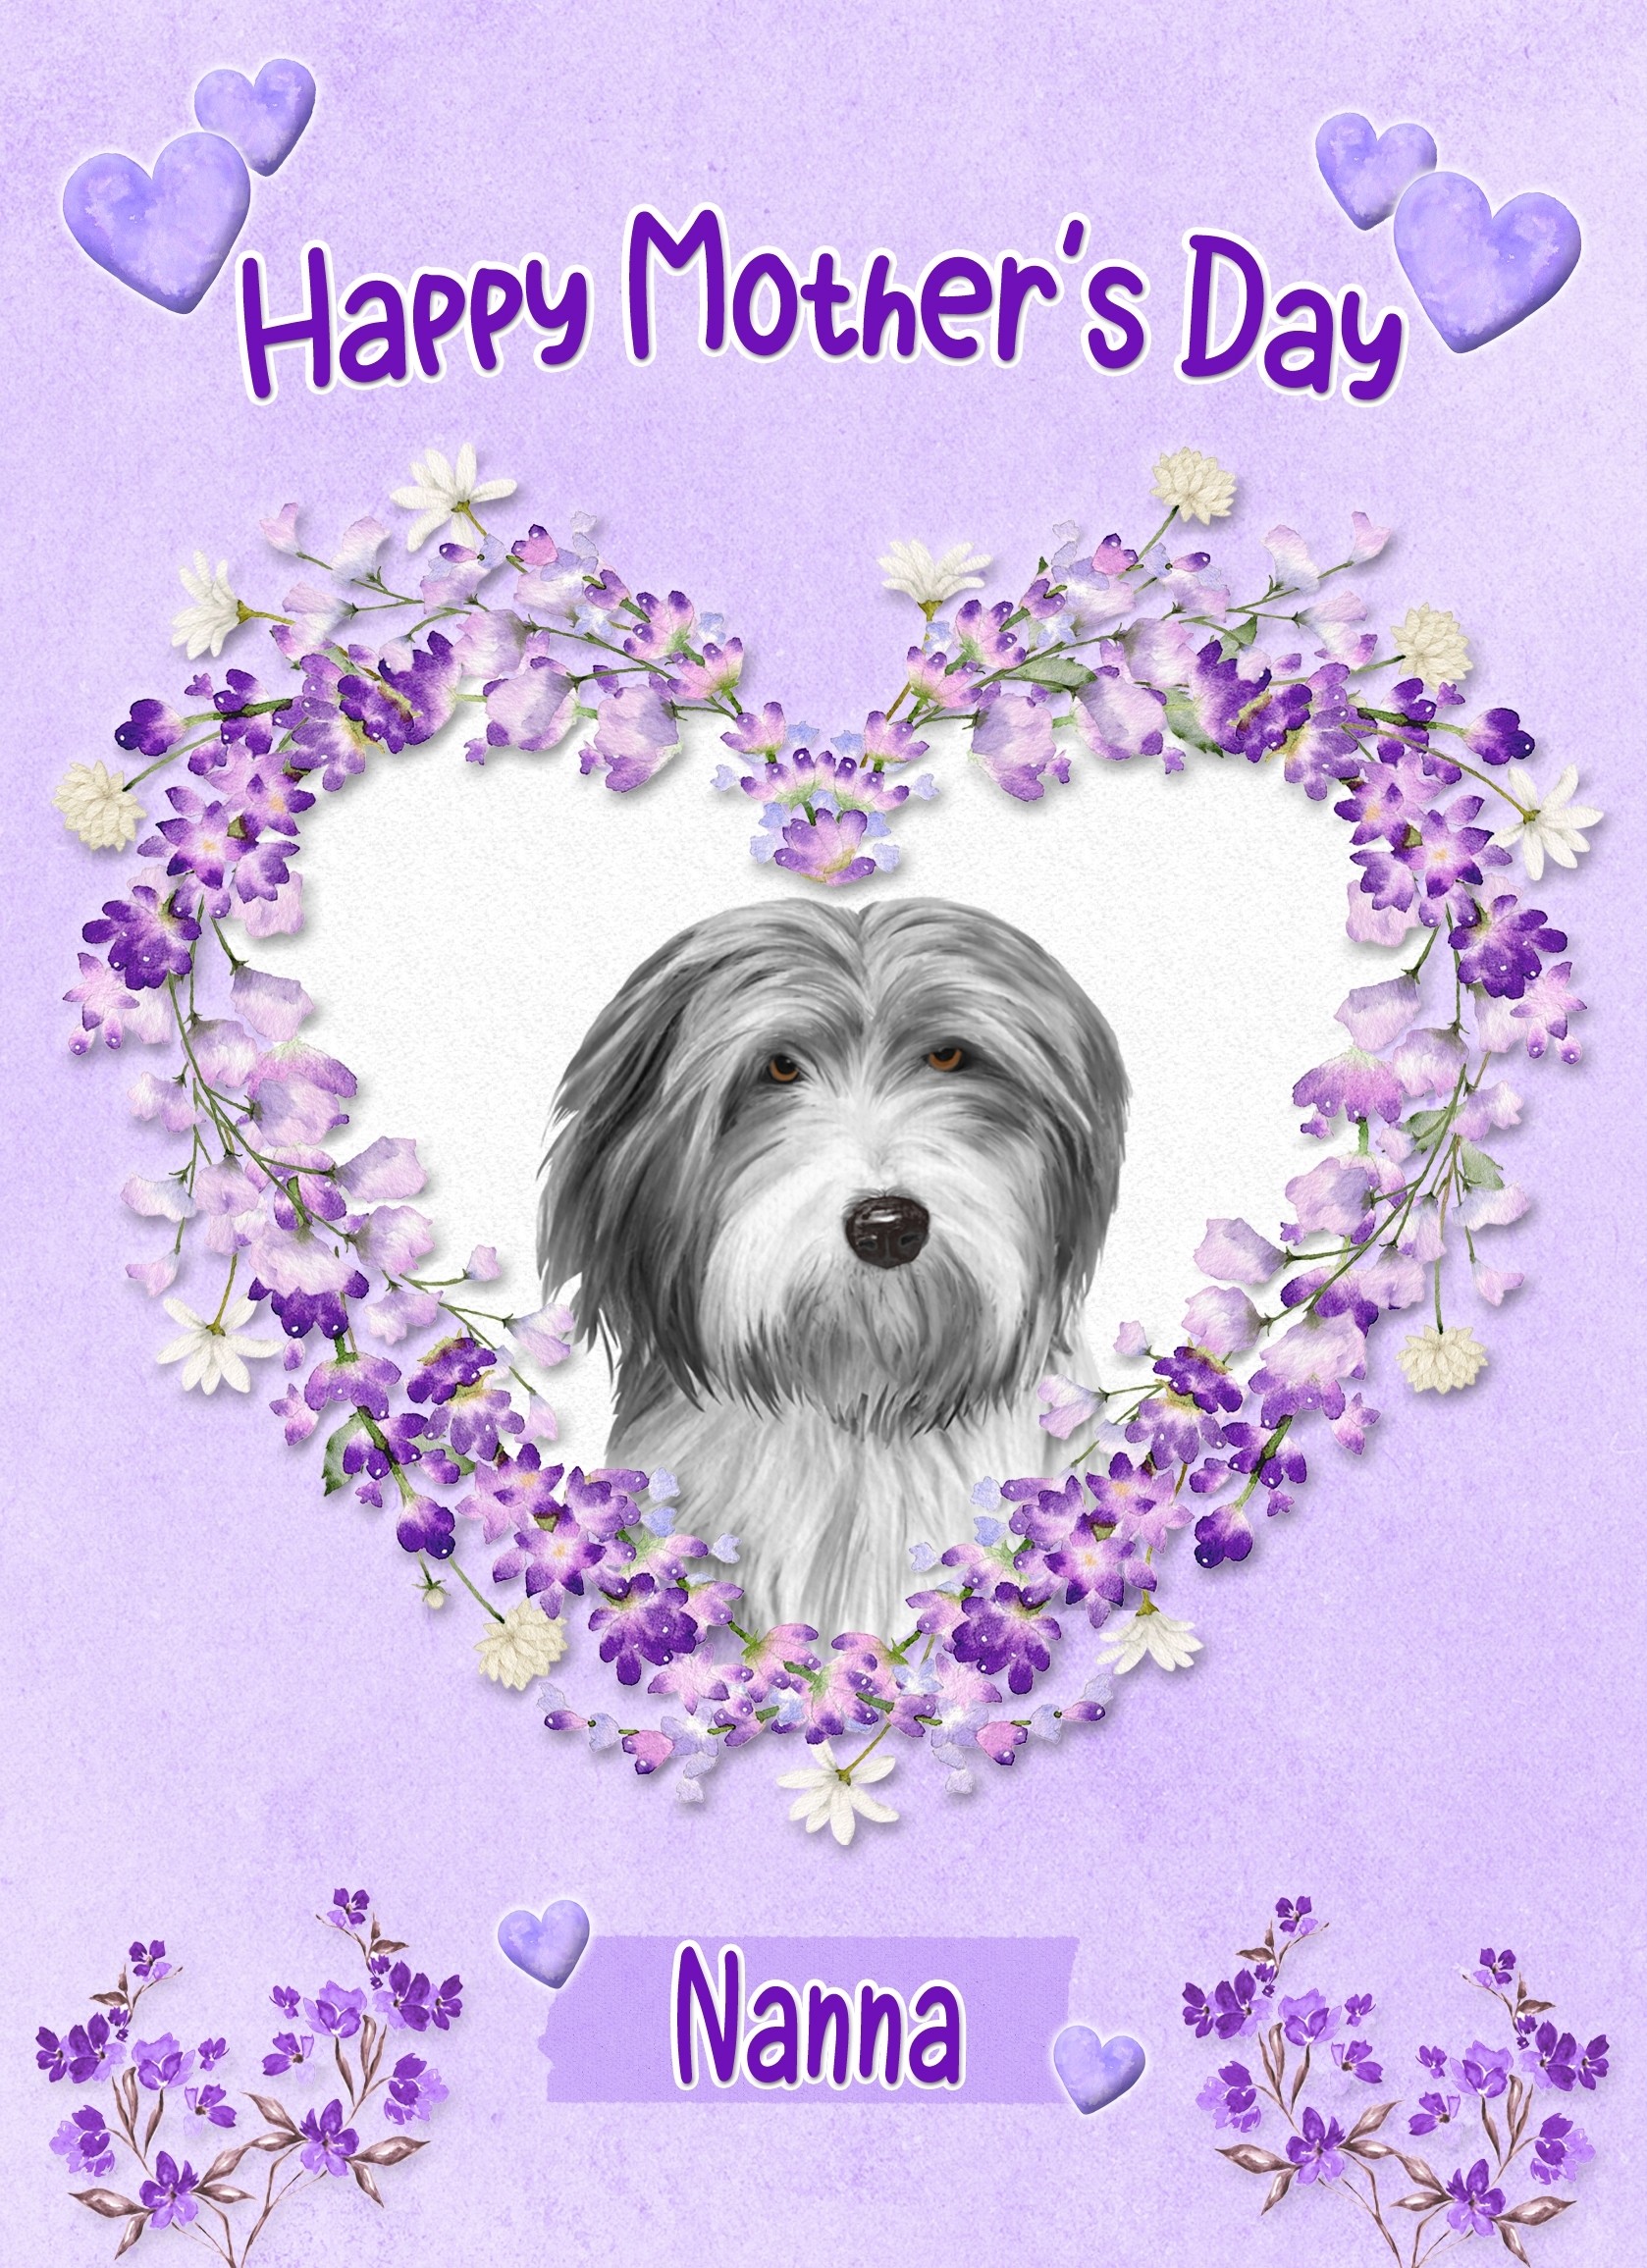 Bearded Collie Dog Mothers Day Card (Happy Mothers, Nanna)